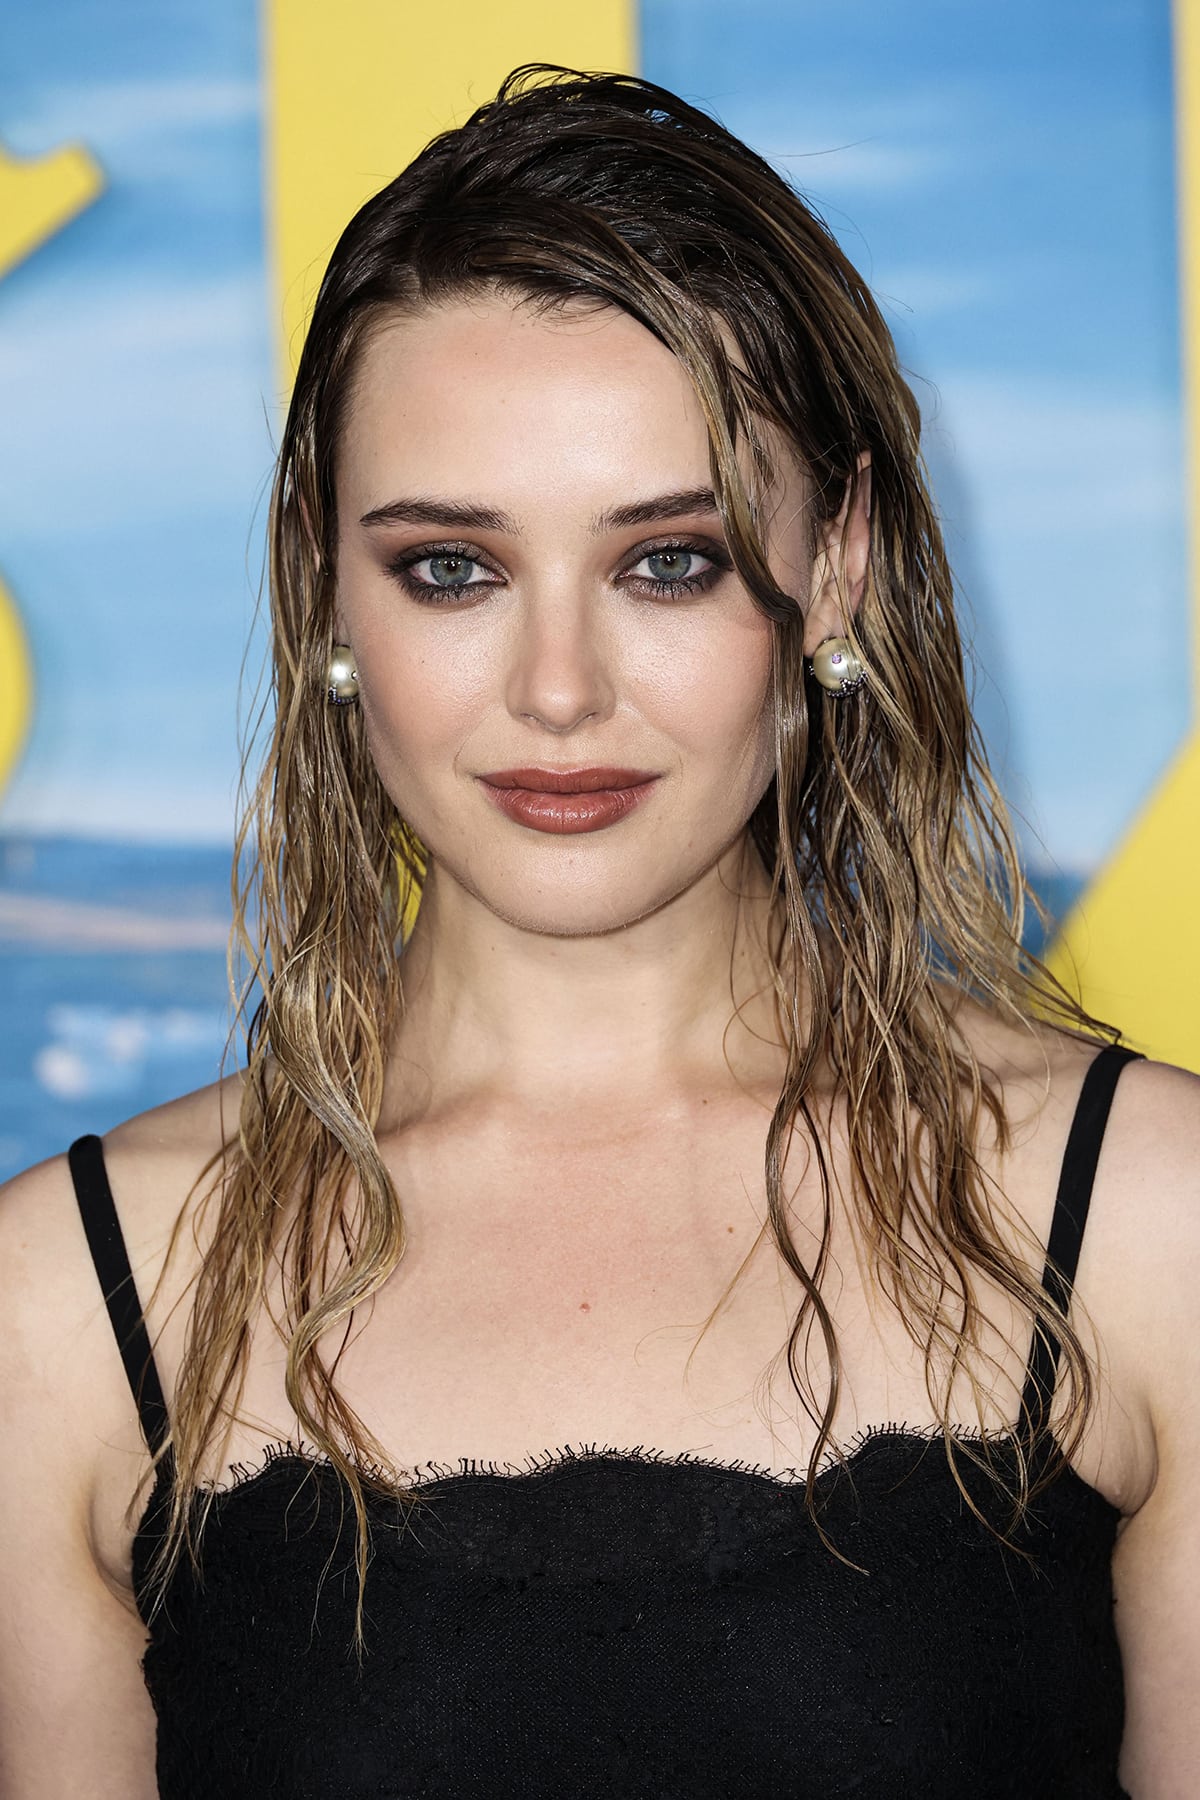 Katherine Langford keeps the glam-grunge vibe going with a wet-look hairstyle, smokey eyeshadow, eyeliner, and dark nude lipstick